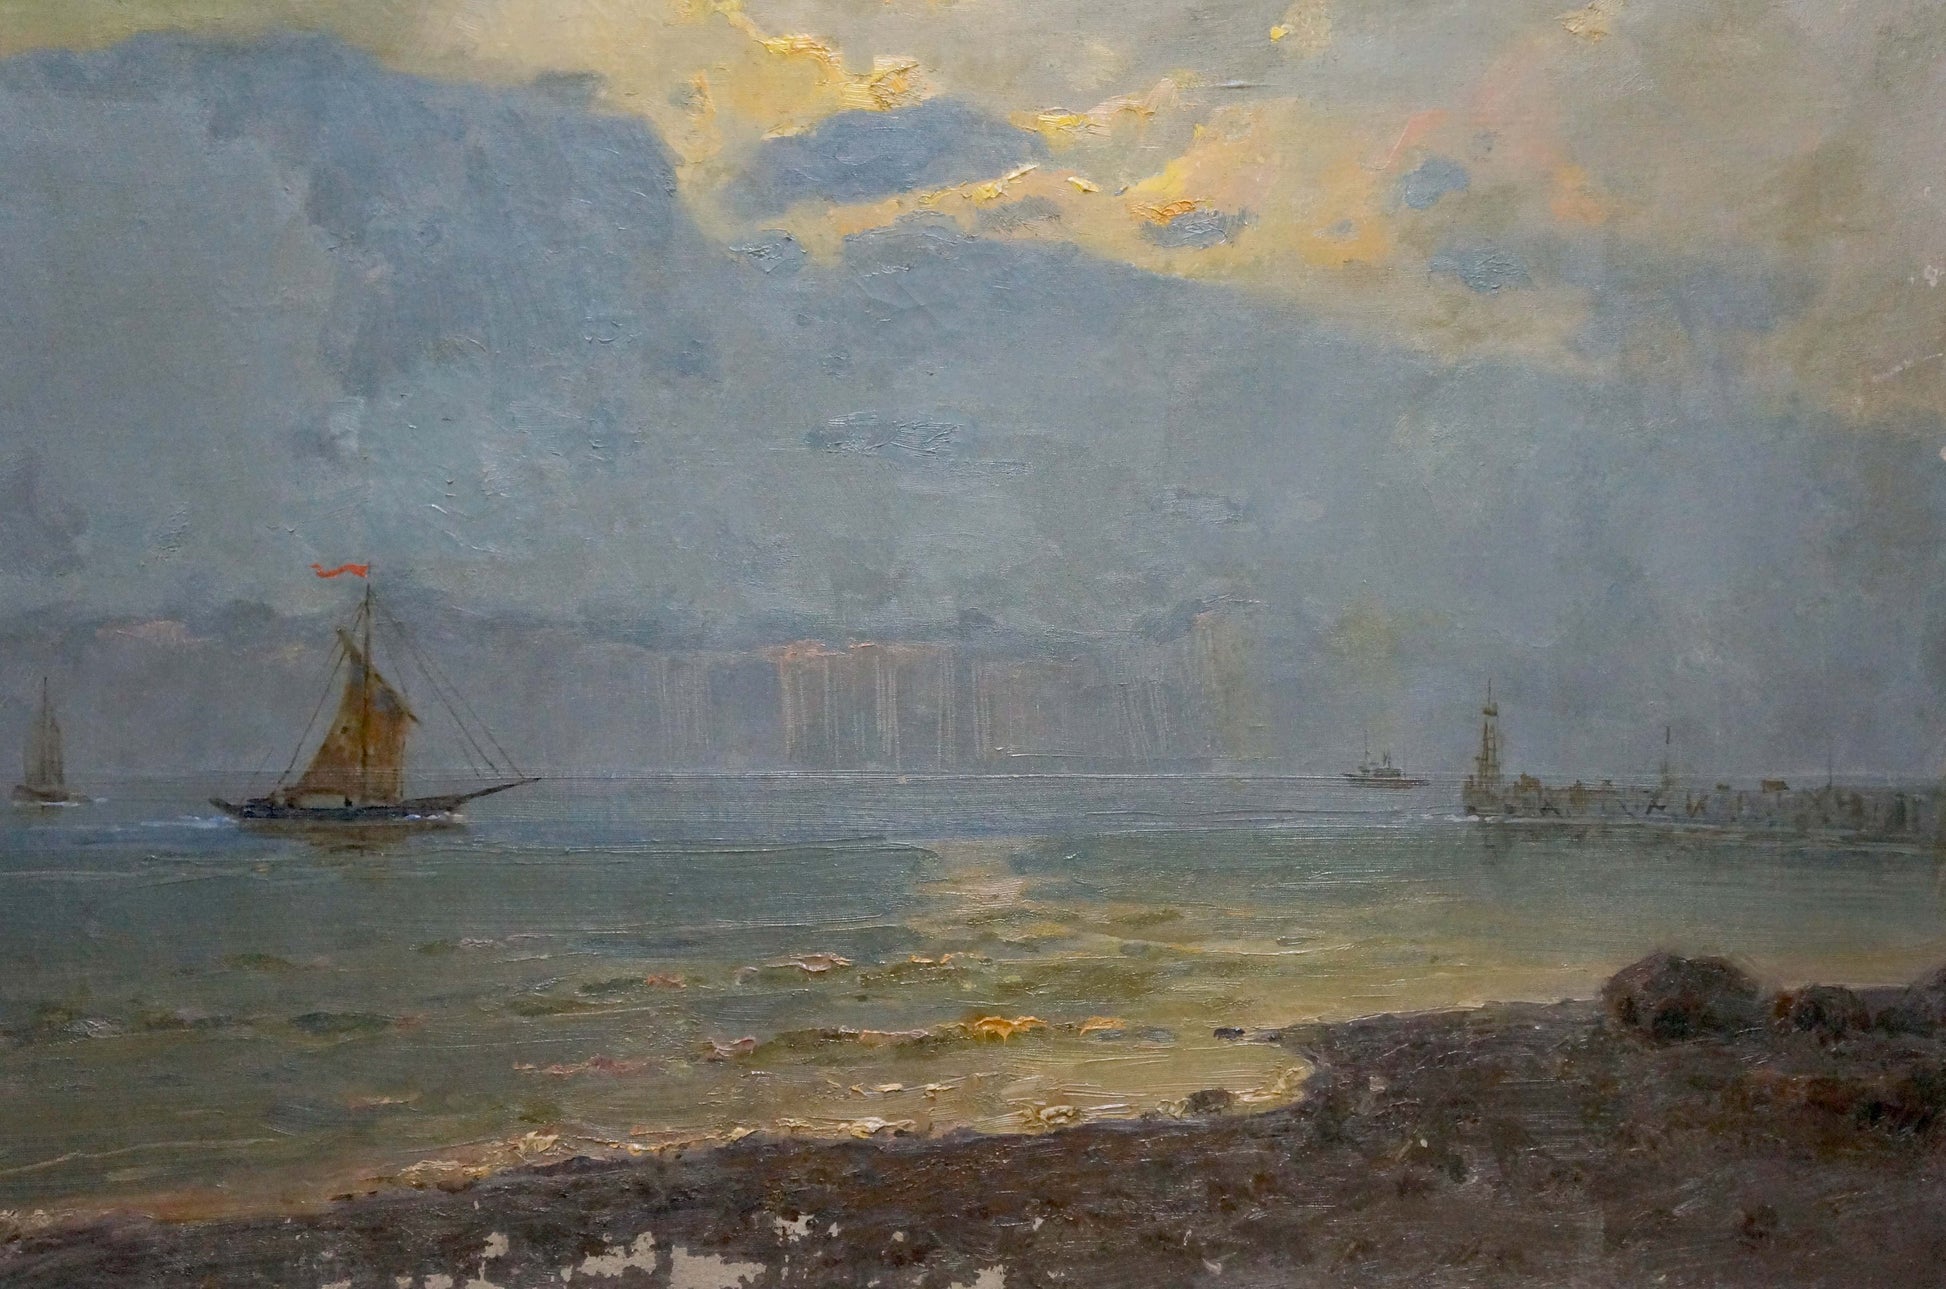 Sailing vessels captured on a still sea in an oil painting, the artist's identity undisclosed